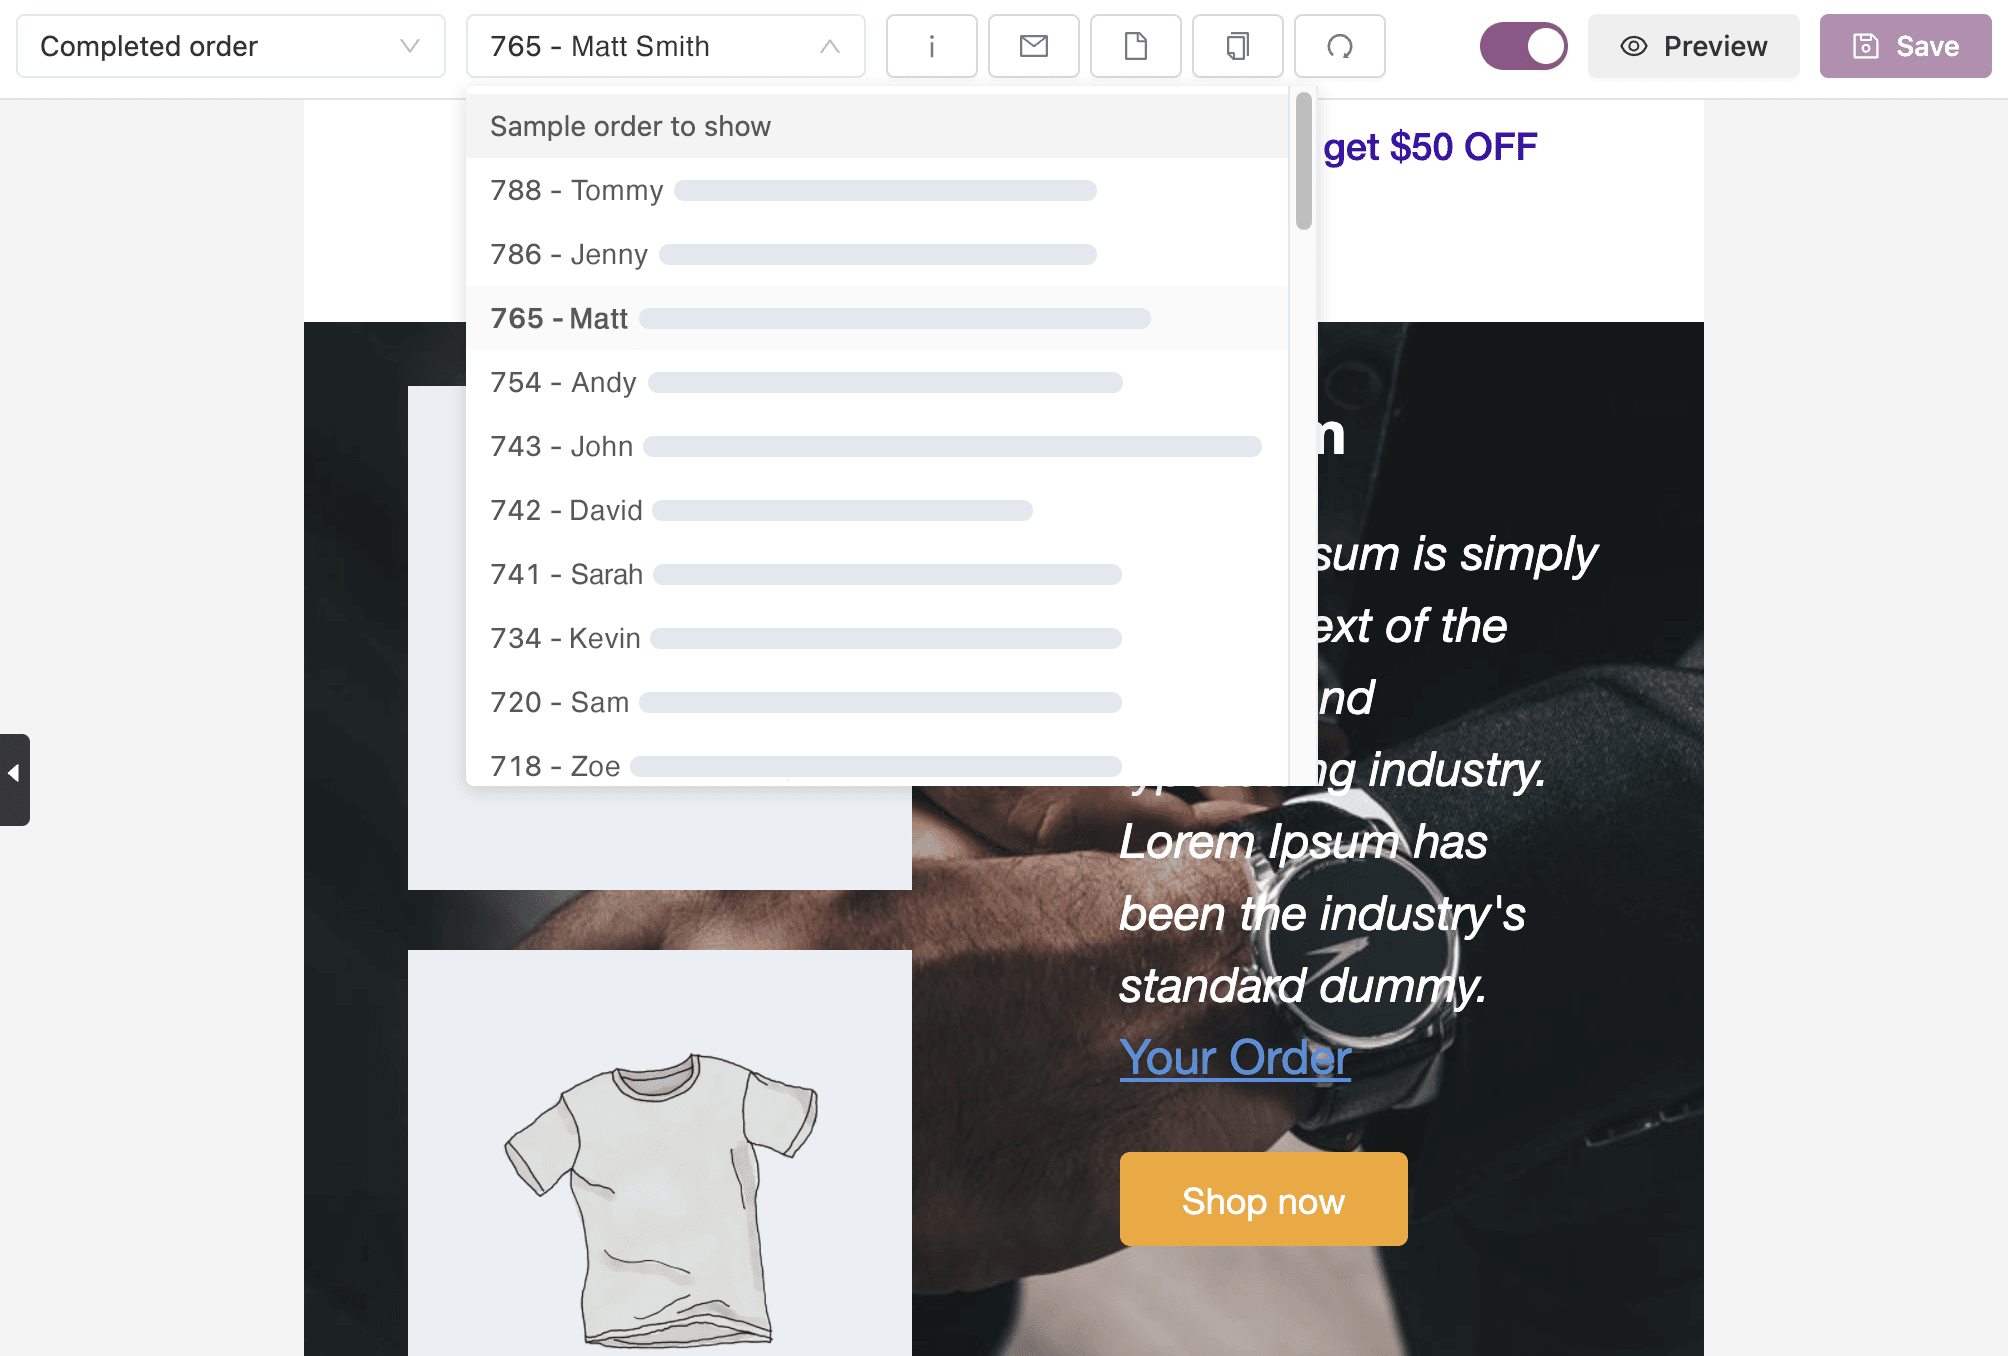 Send test email with recent WooCommerce order info